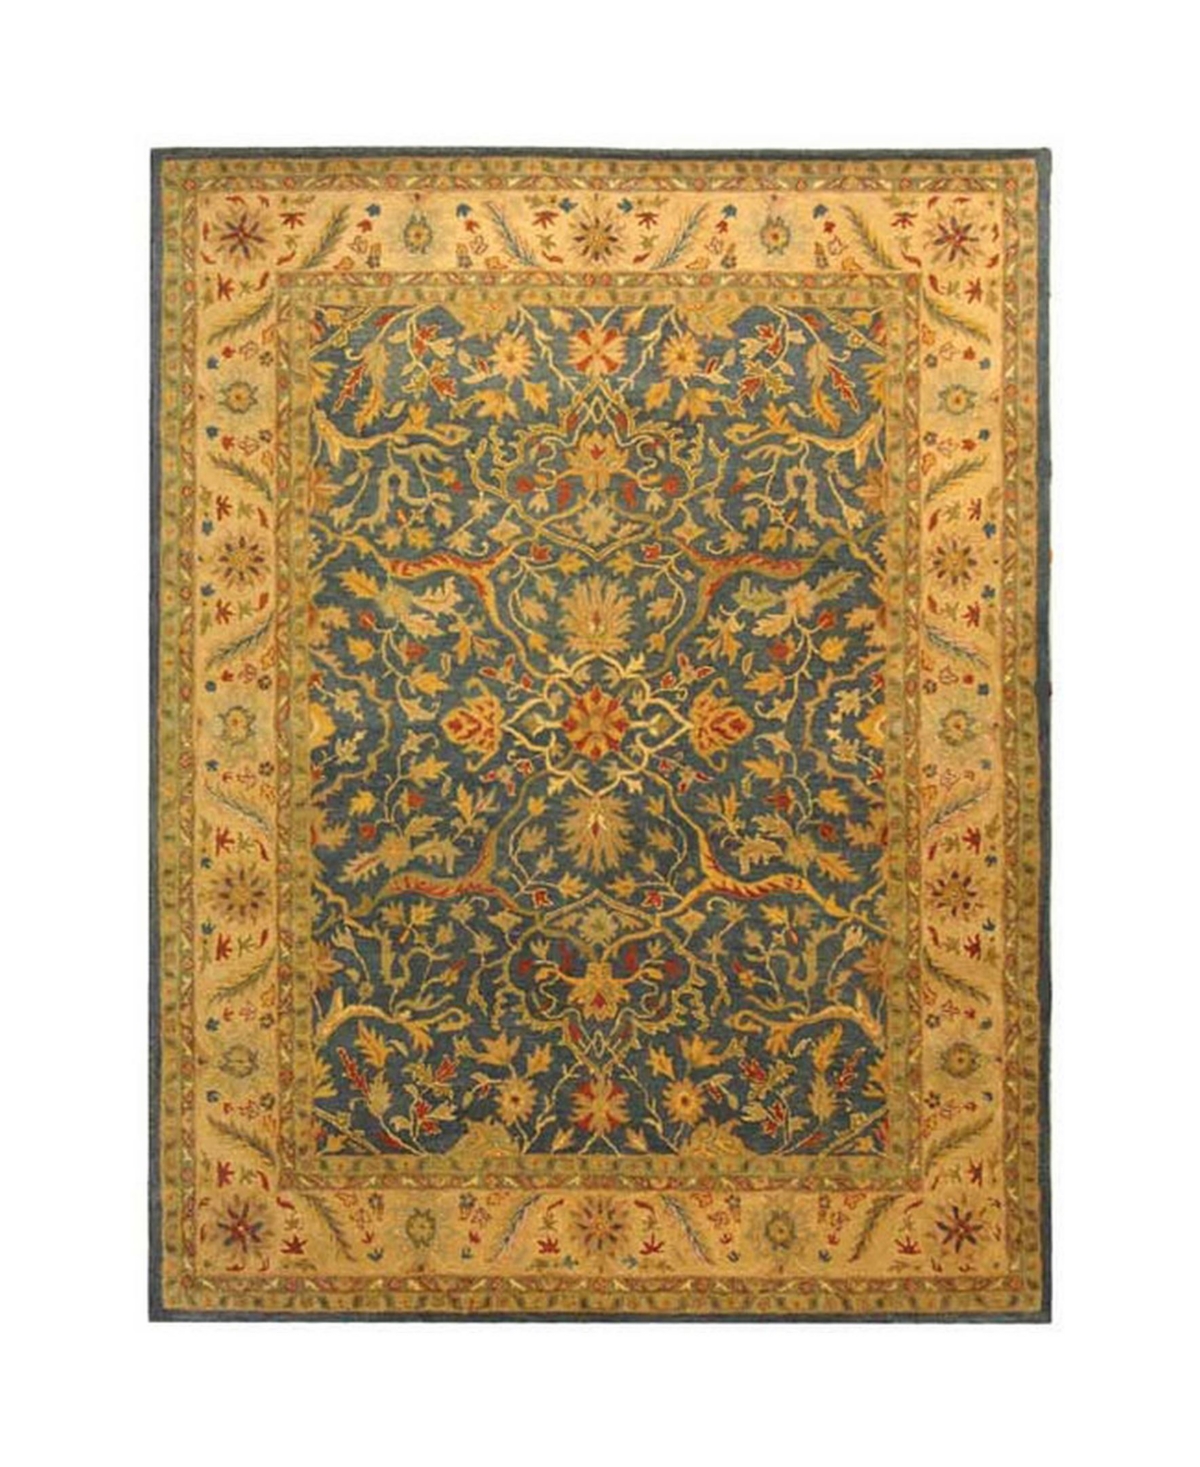 Safavieh Antiquity At14 Blue 8'3in x 11' Area Rug - Blue